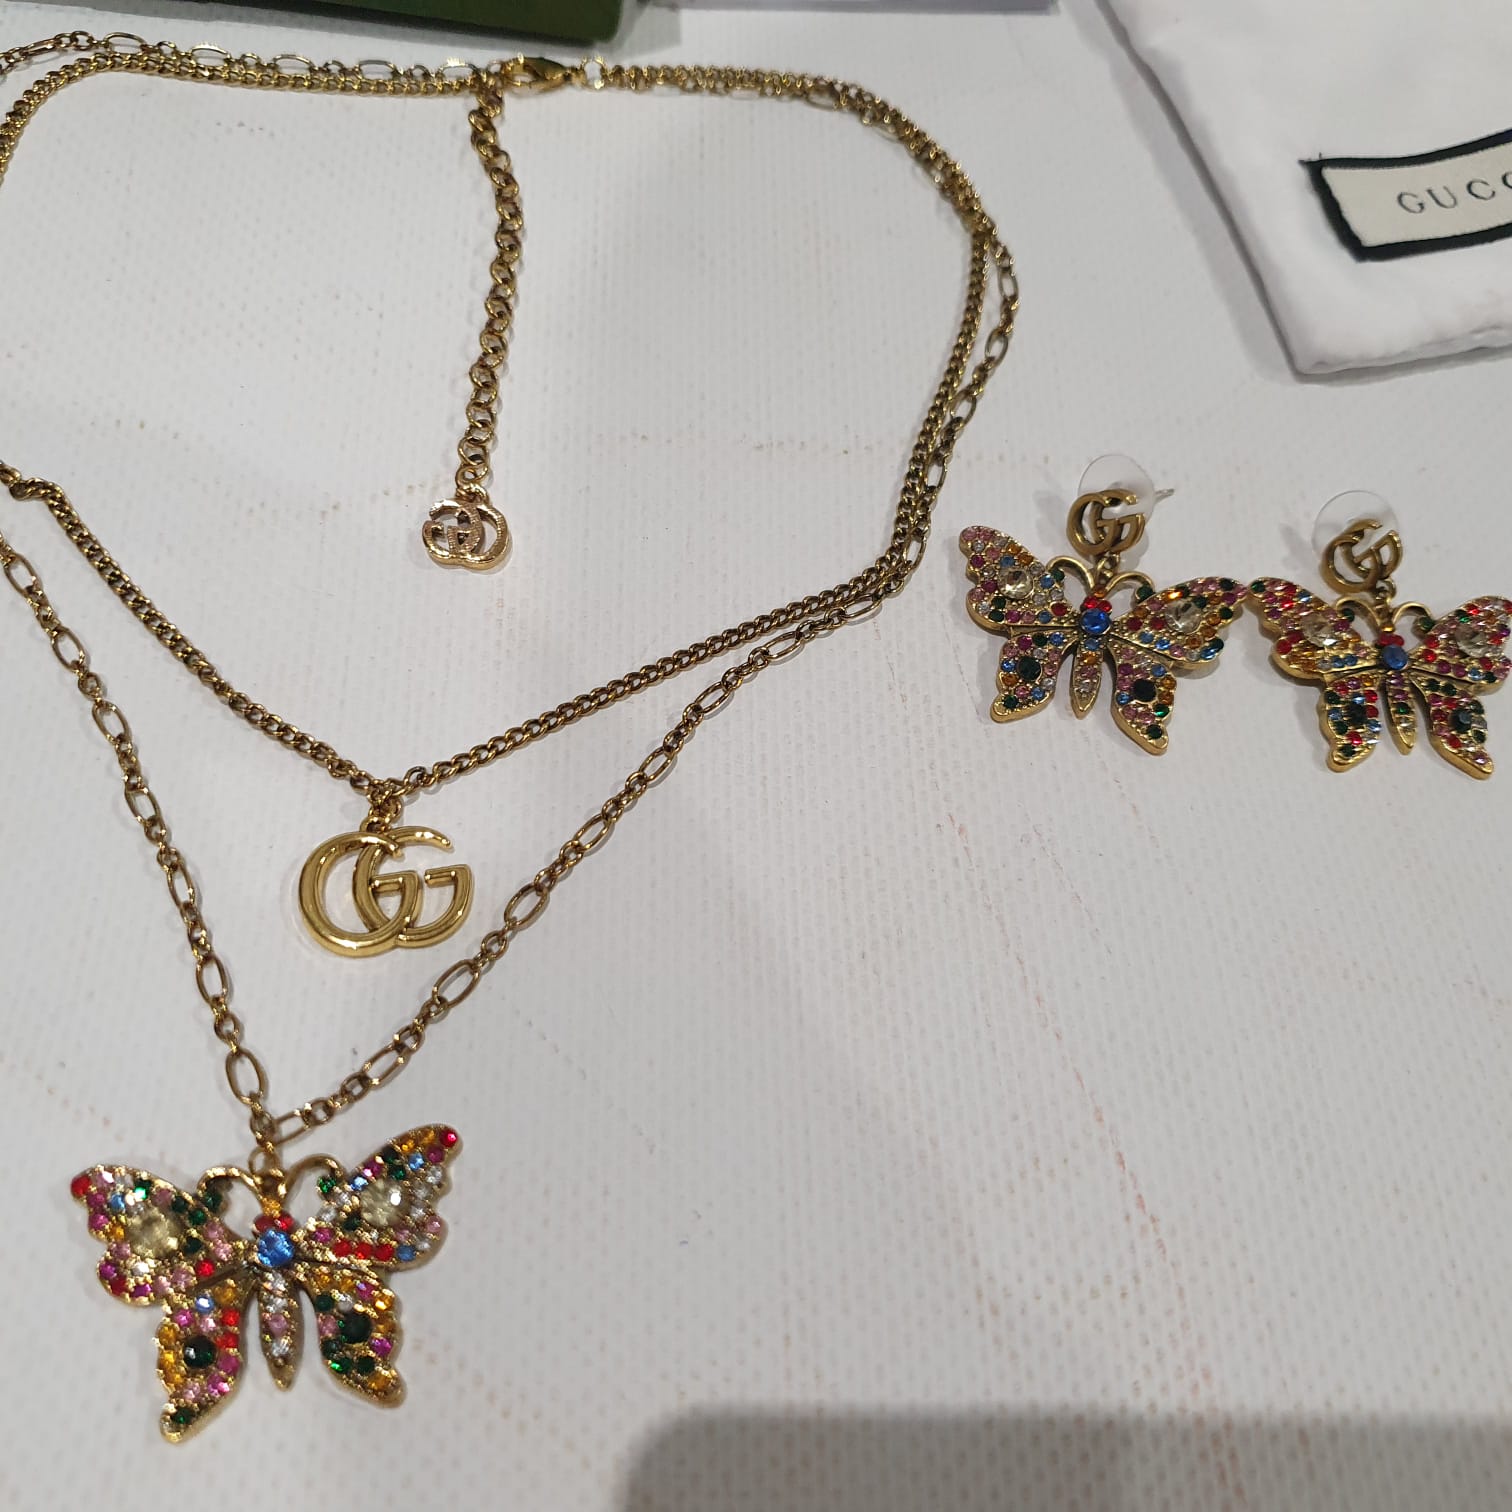 Gucci Necklace and Earrings